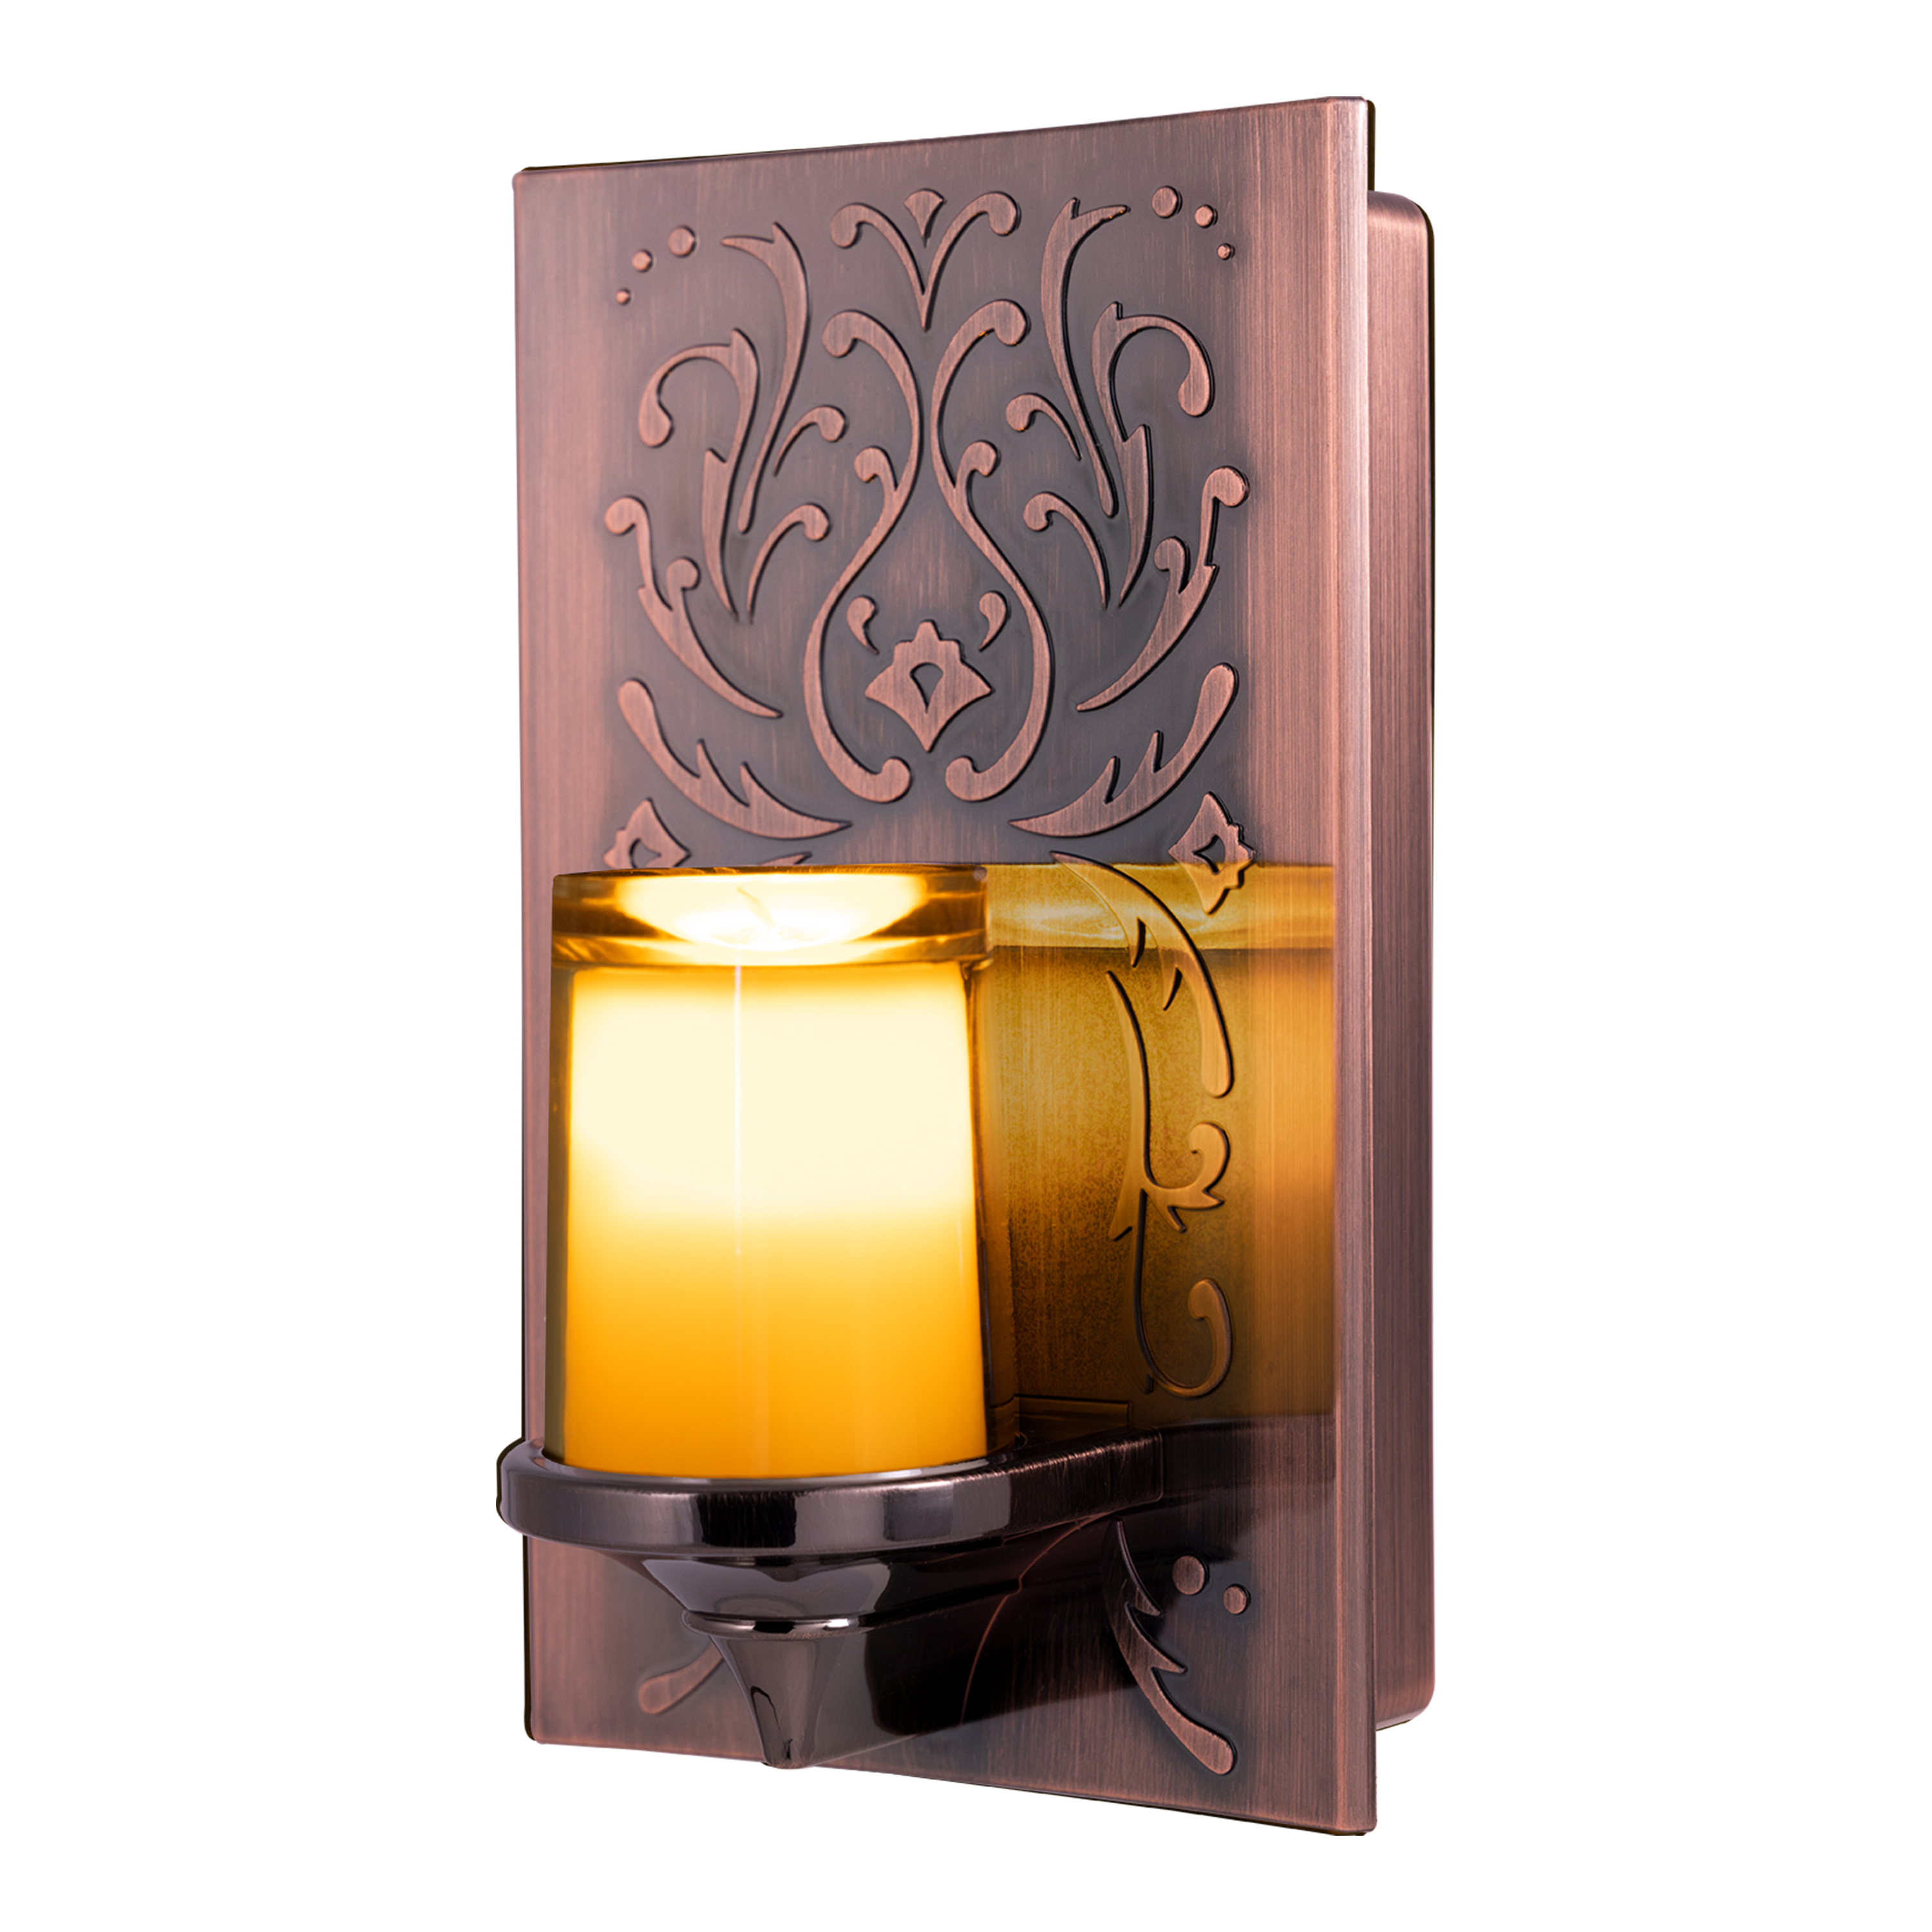 GE CandleLite LED Plug-In Night Light, Flickering Candle Design, Oil Rubbed Bronze, 11258 - image 1 of 7